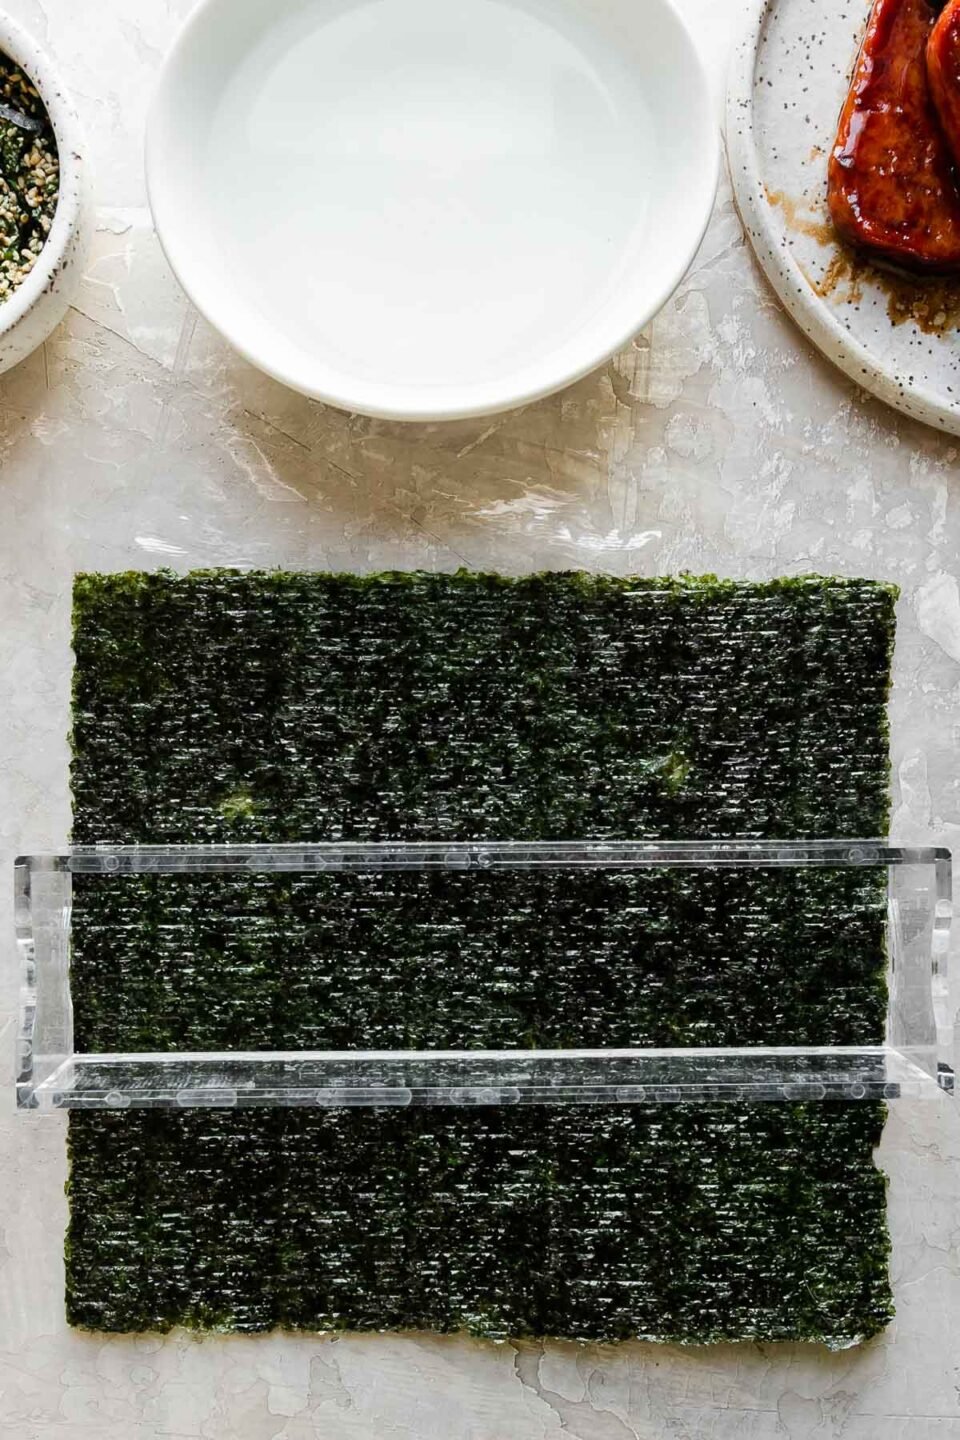 A close up of a single sheet of sushi nori rests atop a piece of plastic wrap that sits atop a creamy white textured surface. The outer box of a double musubi mold is arranged in the center of the sushi nori with the long edge of the mold running parallel with the long edge of the nori. Resting above the nori & the musubi mold is a small bowl filled with furikake seasoning with a spoon resting inside, another small white bowl filled with water, and a small speckled ceramic plate with pan-fried teriyaki Spam.